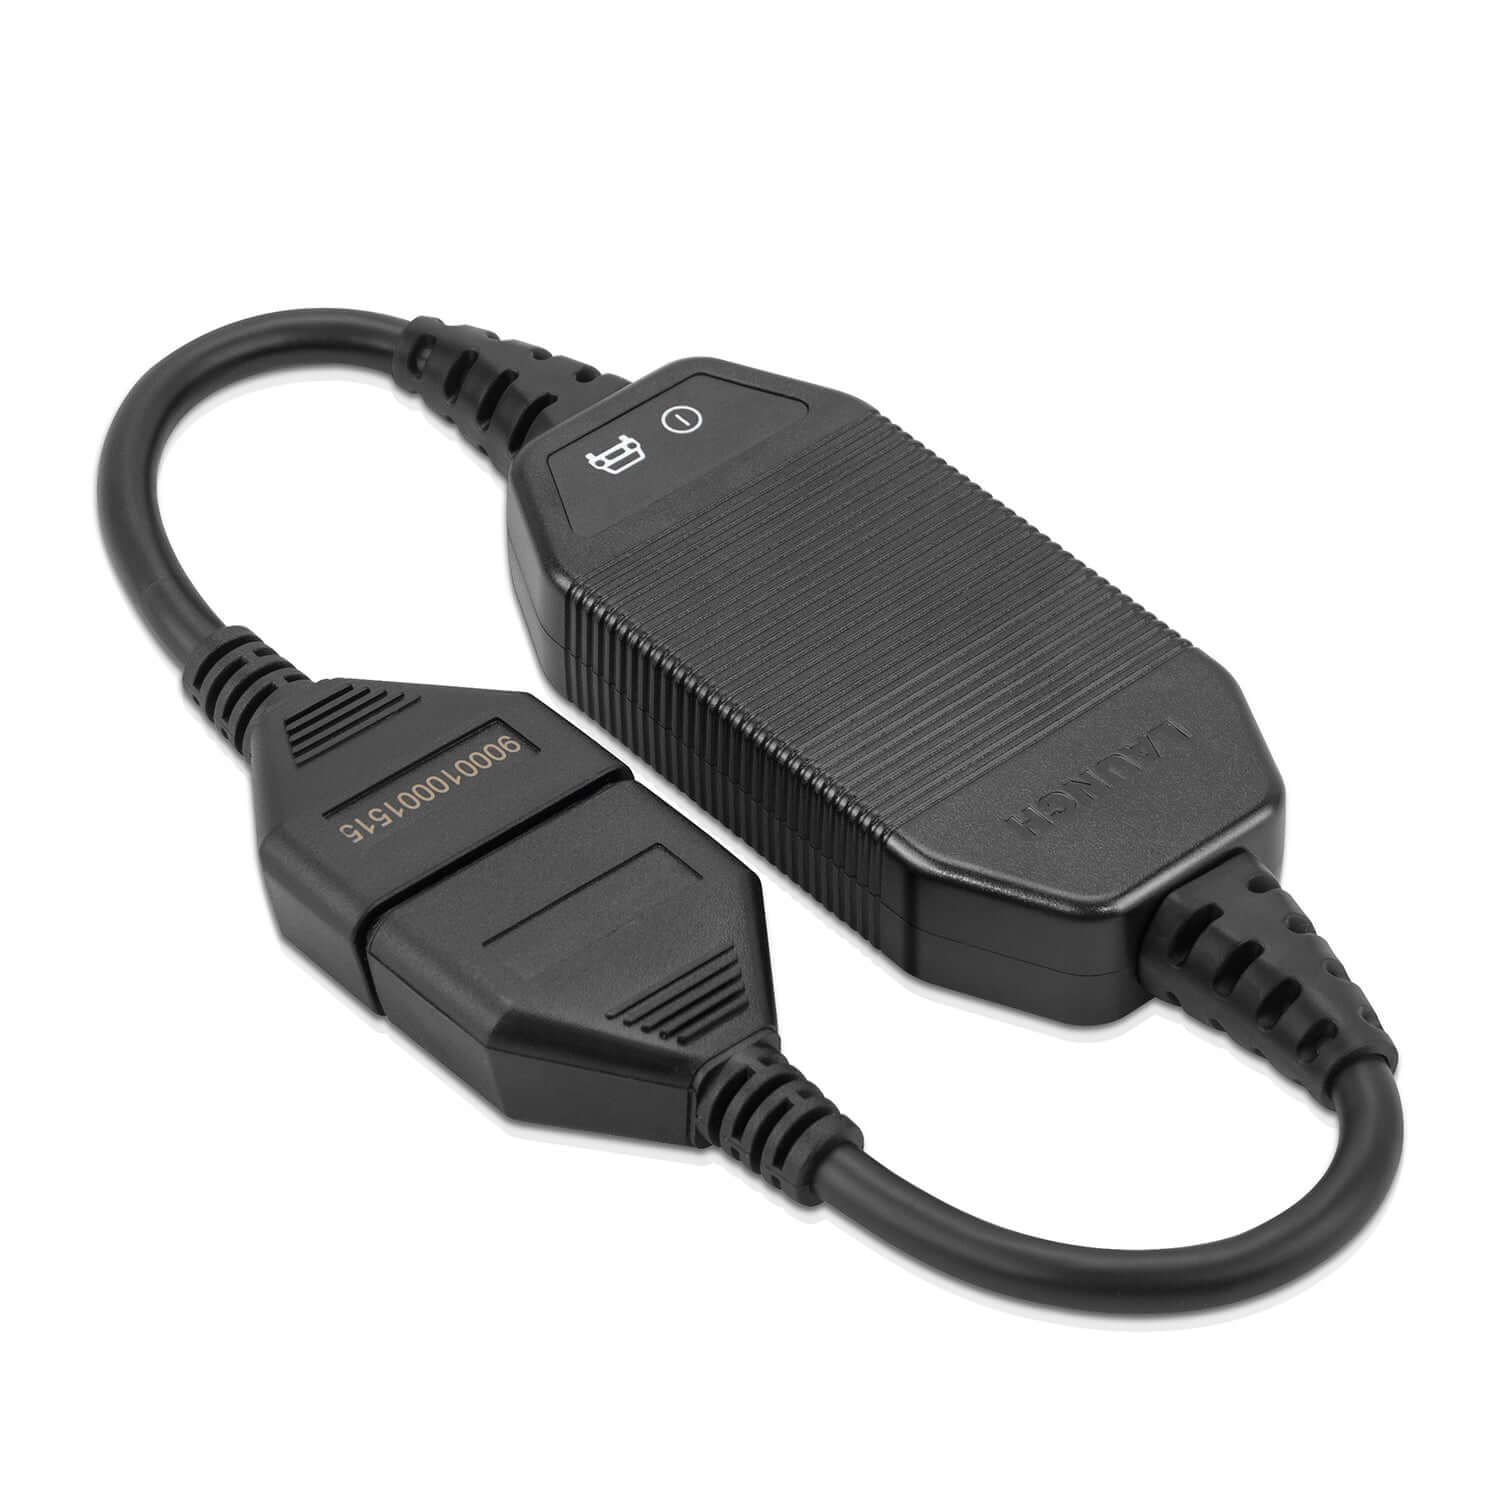 LAUNCH CAN-FD Cable for LAUNCH X431 OBD2 Scanner